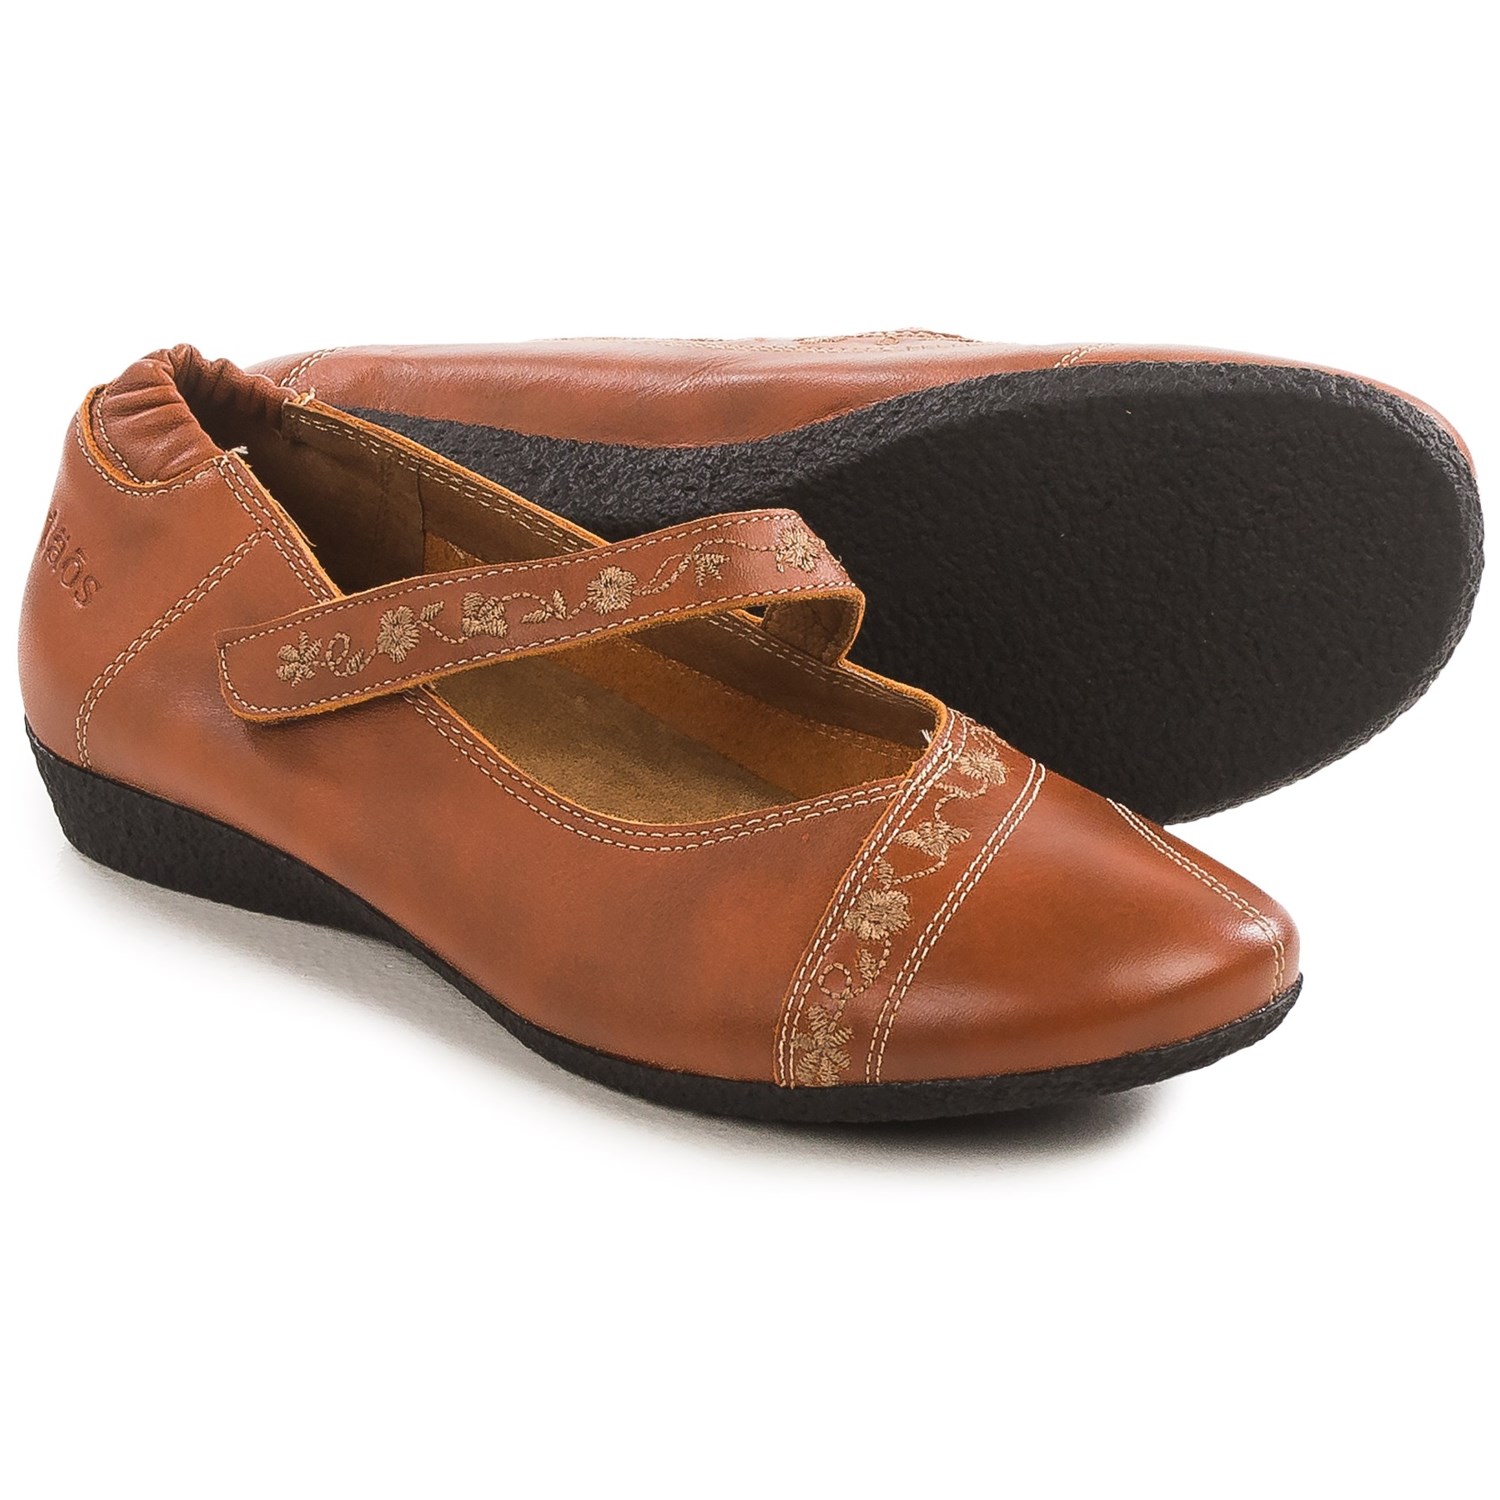 Taos Footwear Grace Mary Jane Shoes (For Women) - Save 40%